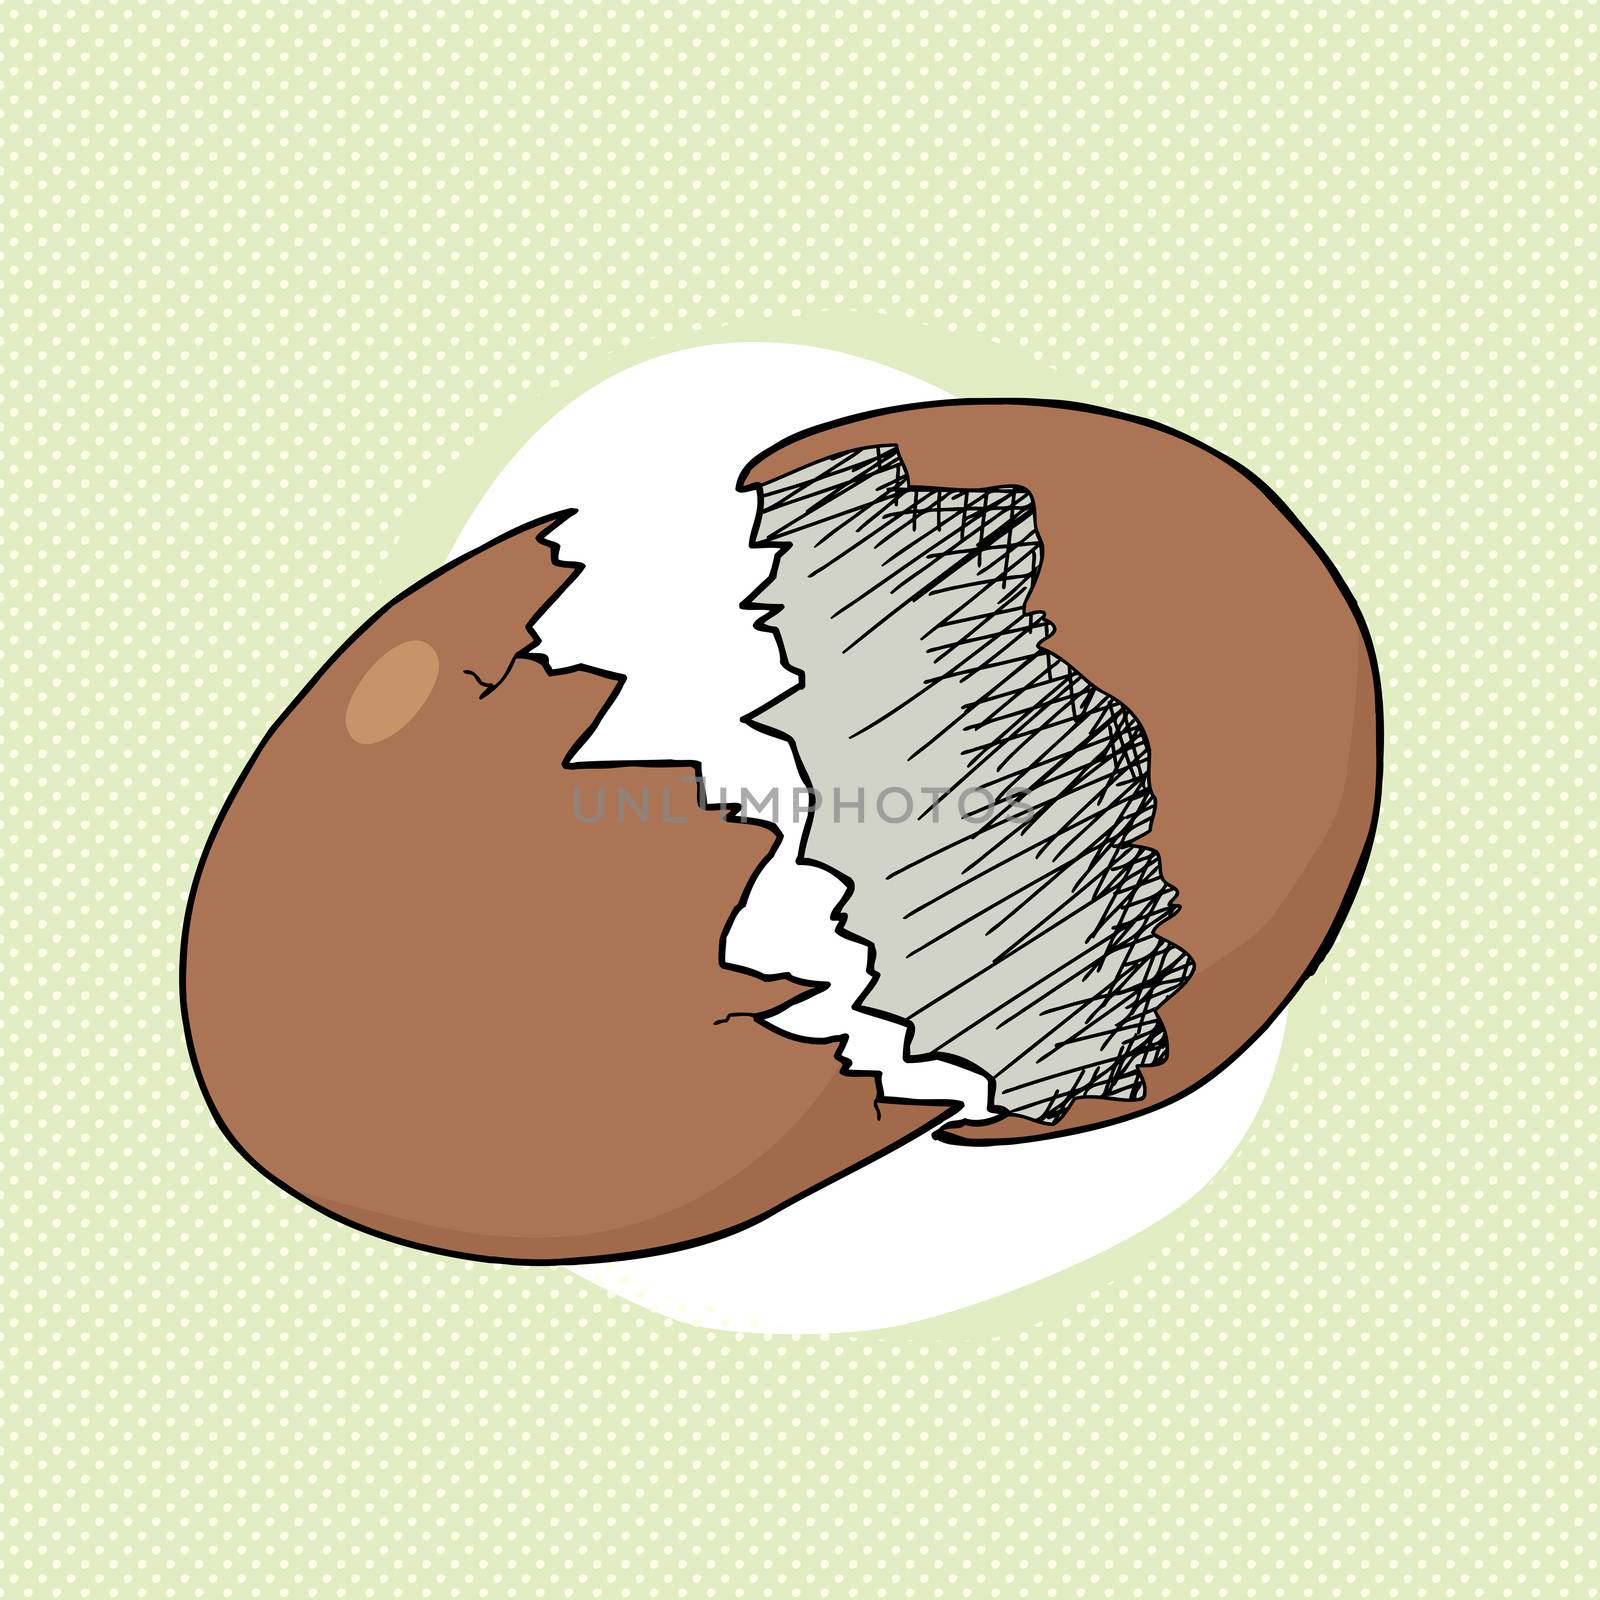 Cracked brown egg over green halftone background